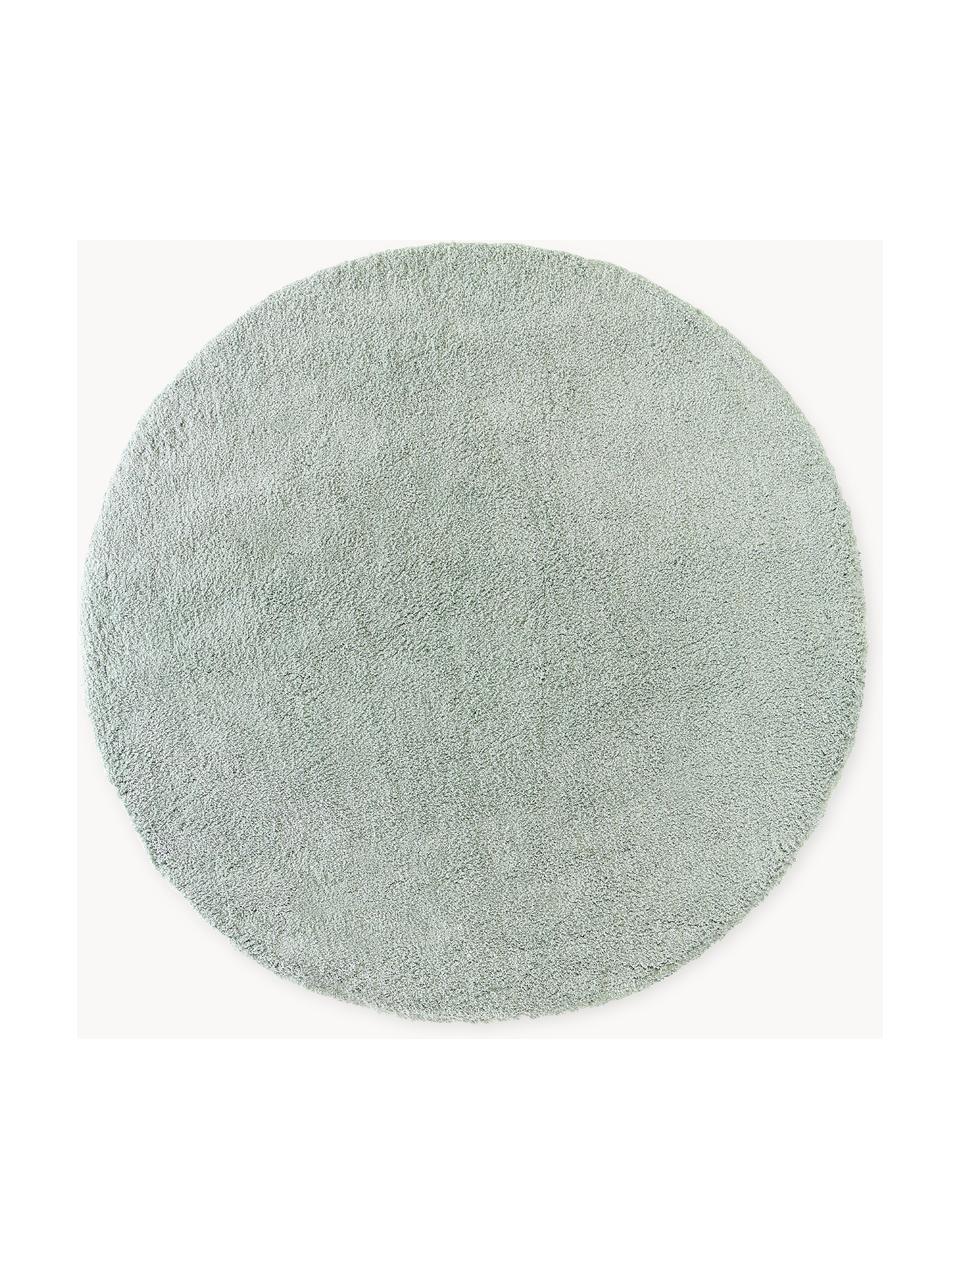 Tapis rond moelleux Leighton, Vert menthe, Ø 200 cm (taille L)